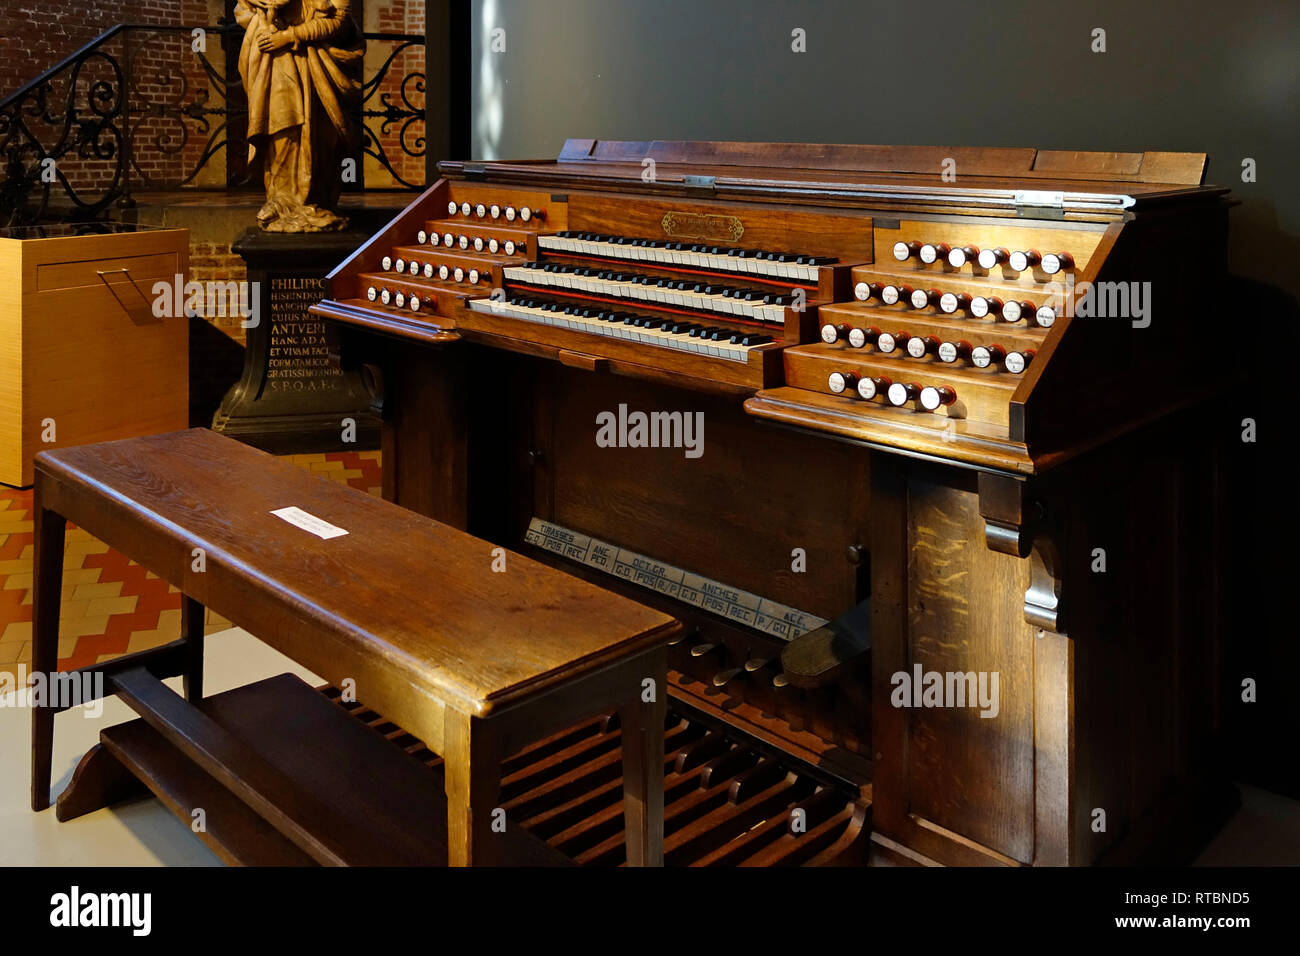 19th century Cavaillé-Coll organ in the Vleeshuis / Butcher's Hall / Meat House, museum about musical instruments in Antwerp, Belgium Stock Photo